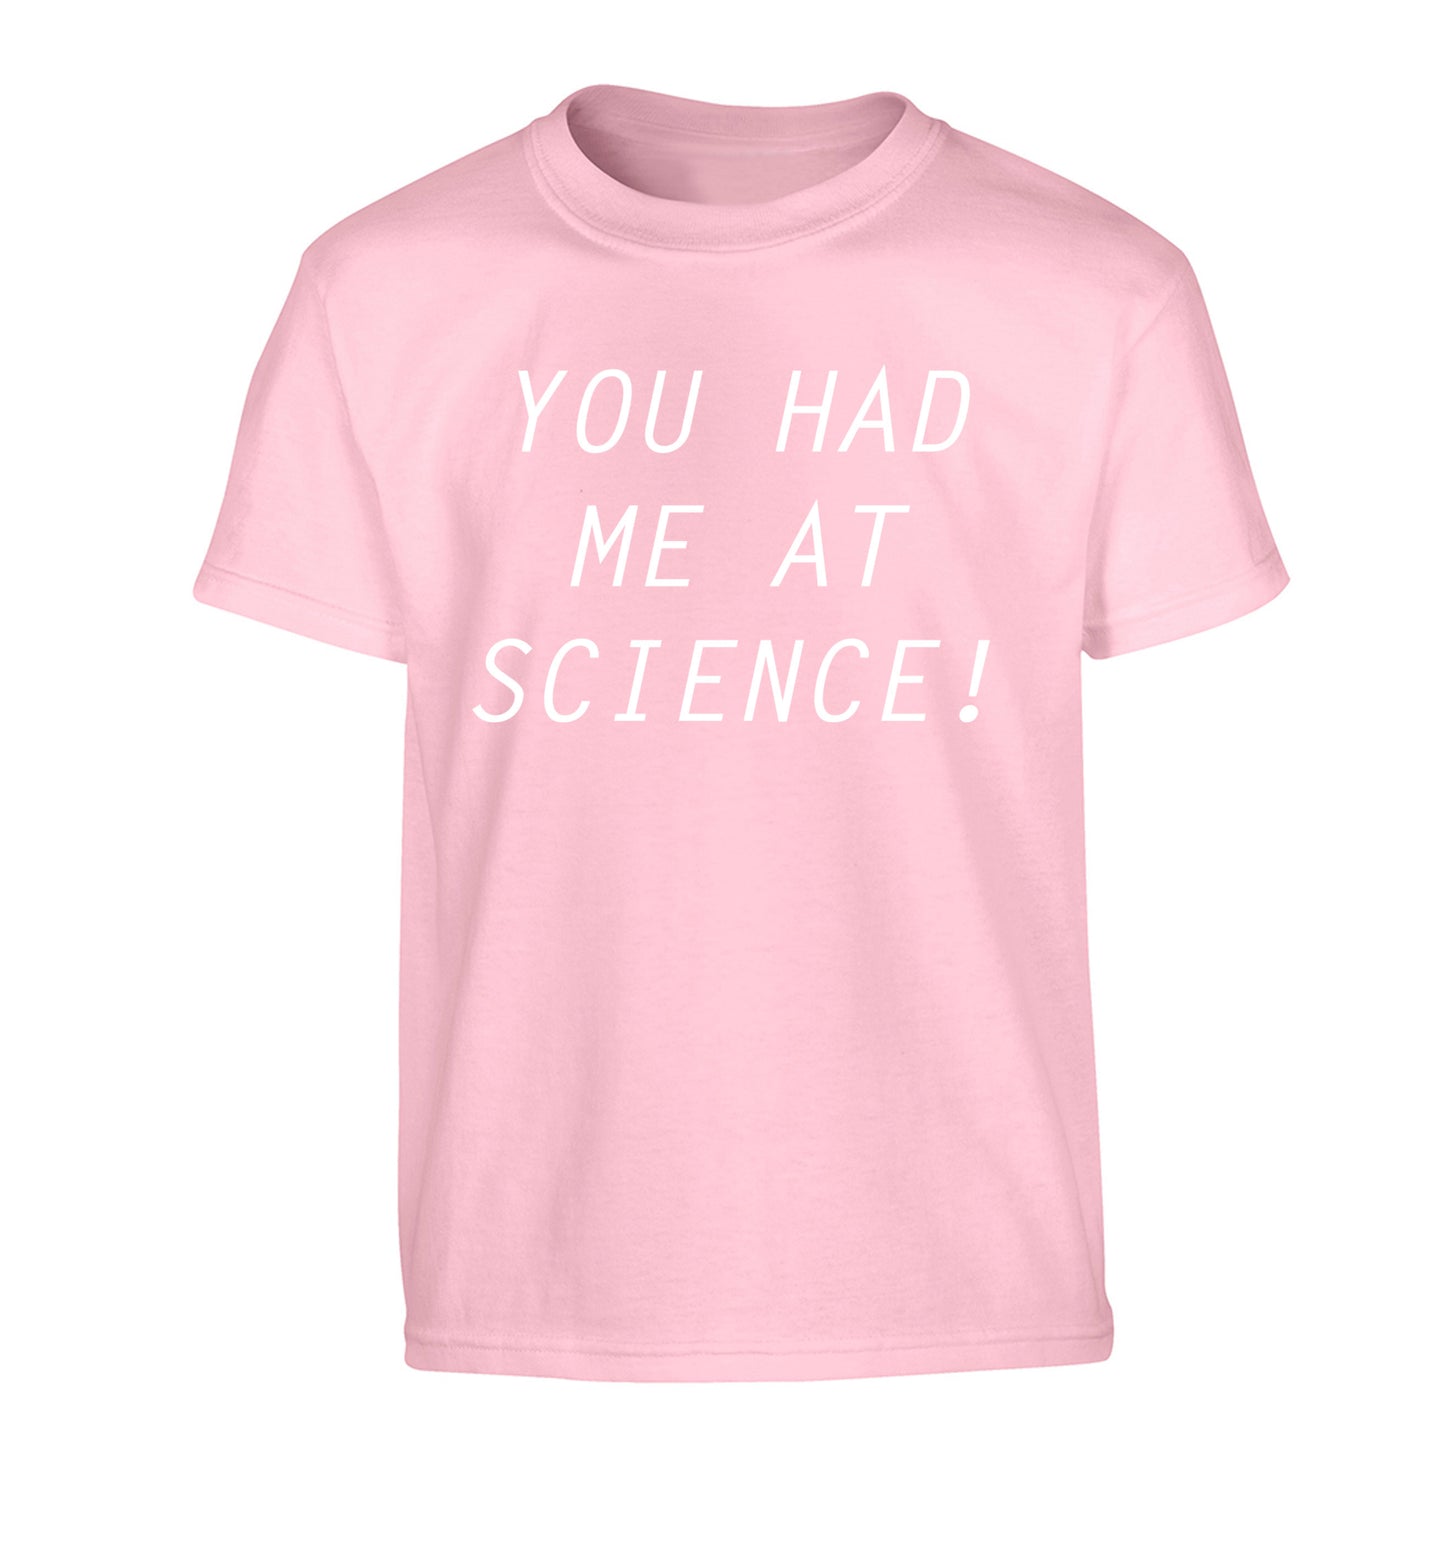 You had me at science Children's light pink Tshirt 12-14 Years